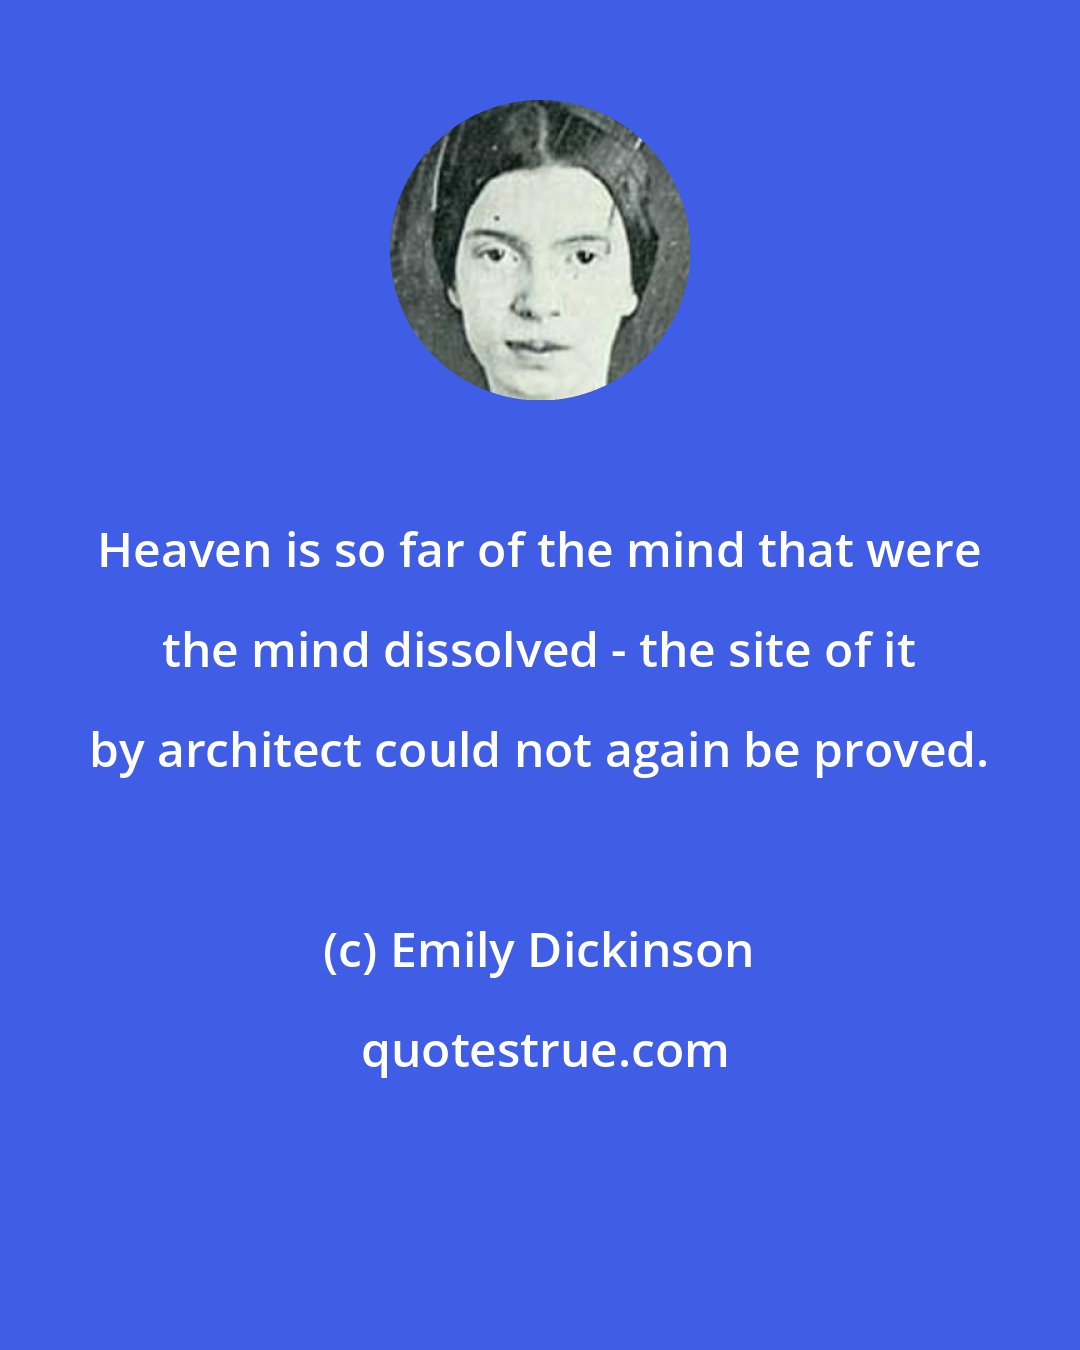 Emily Dickinson: Heaven is so far of the mind that were the mind dissolved - the site of it by architect could not again be proved.